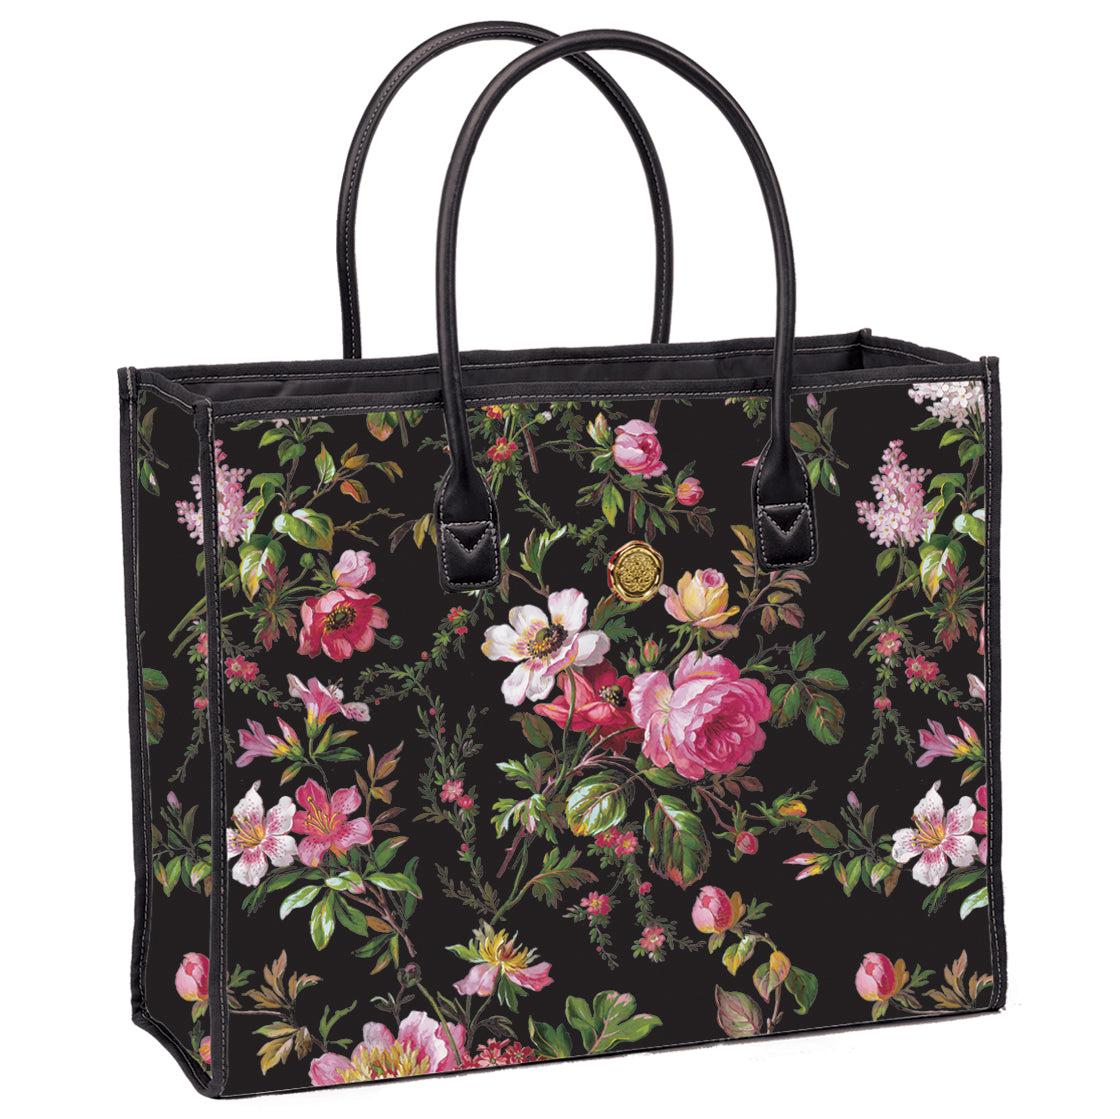 a black floral bag with pink and yellow flowers on it.